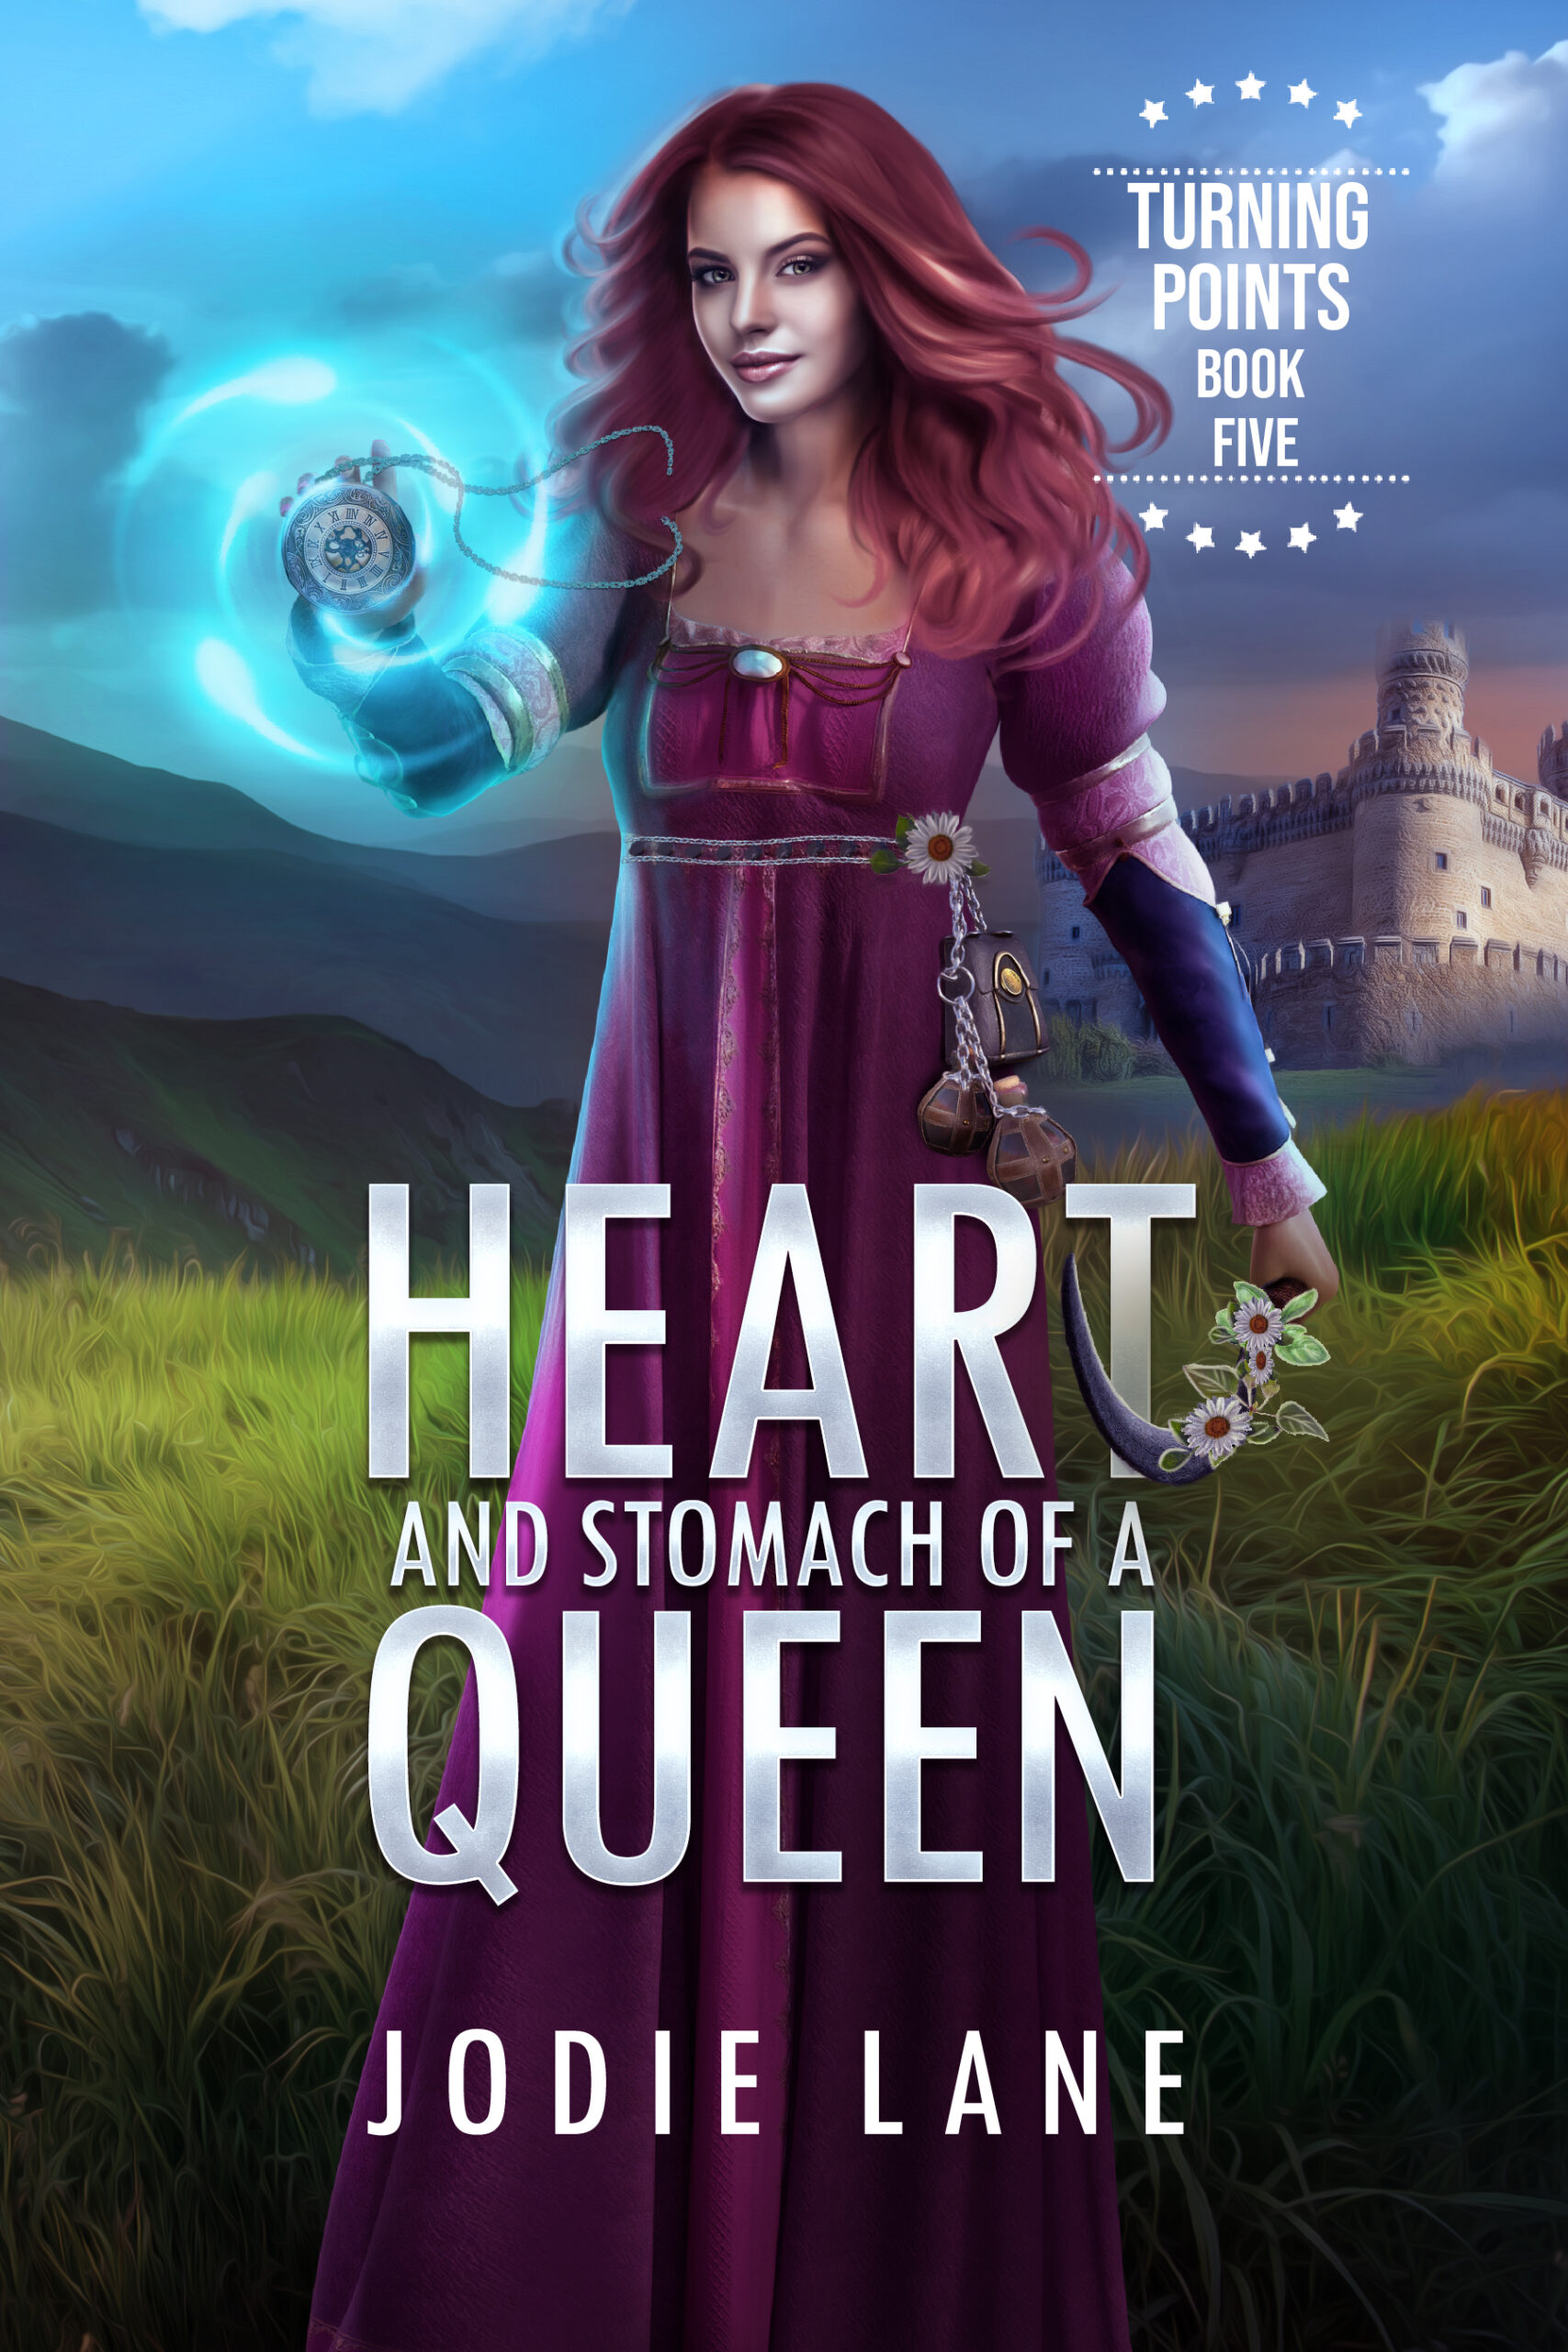 Heart and Stomach of a Queen New Cover